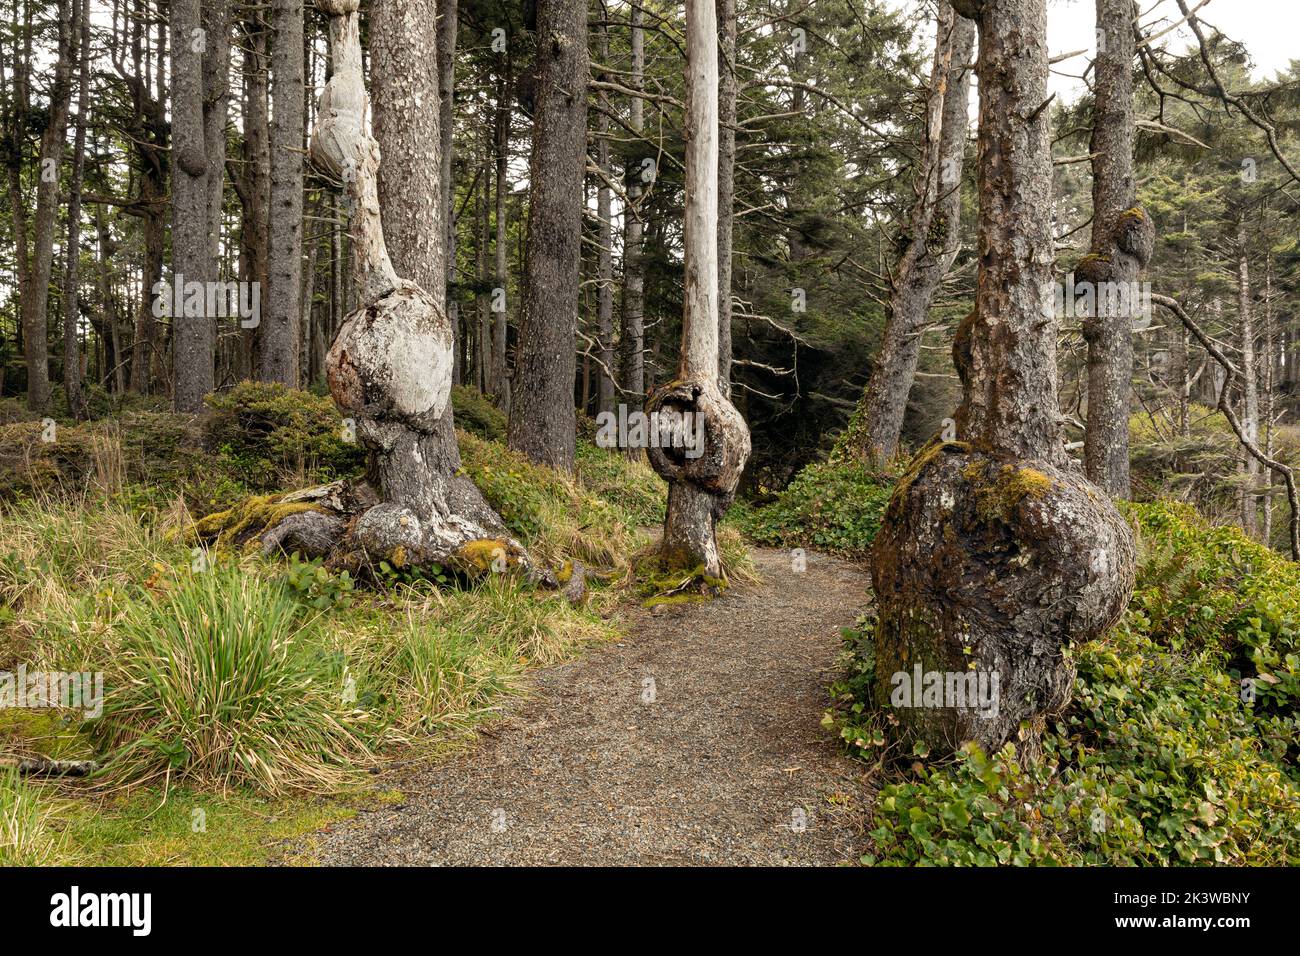 WA22087-00...WASHINGTON - Spruce Burl Loop Trail on the edge of the Pacific Ocean in Olympic National Park. Stock Photo